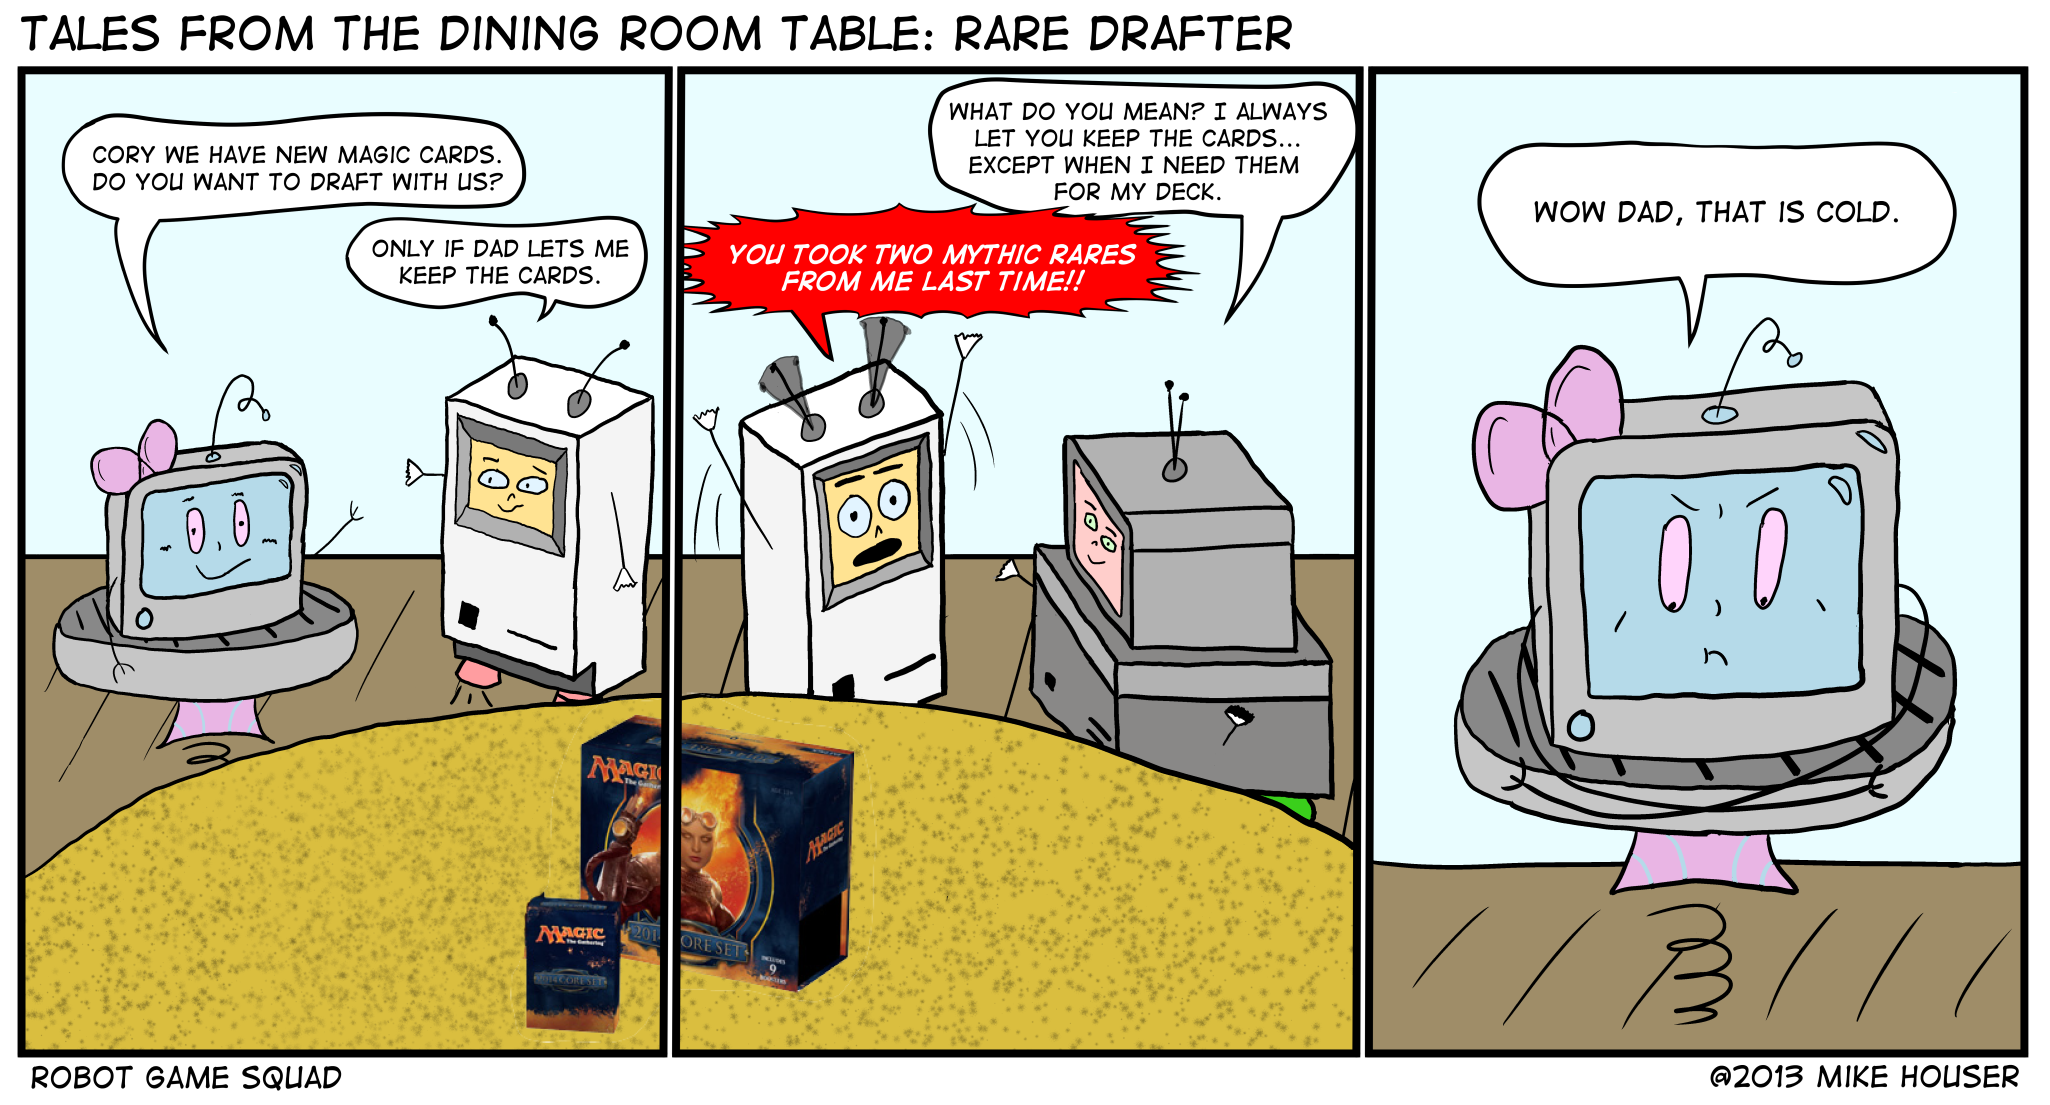 Tales from the Dining Room Table: Rare Drafter